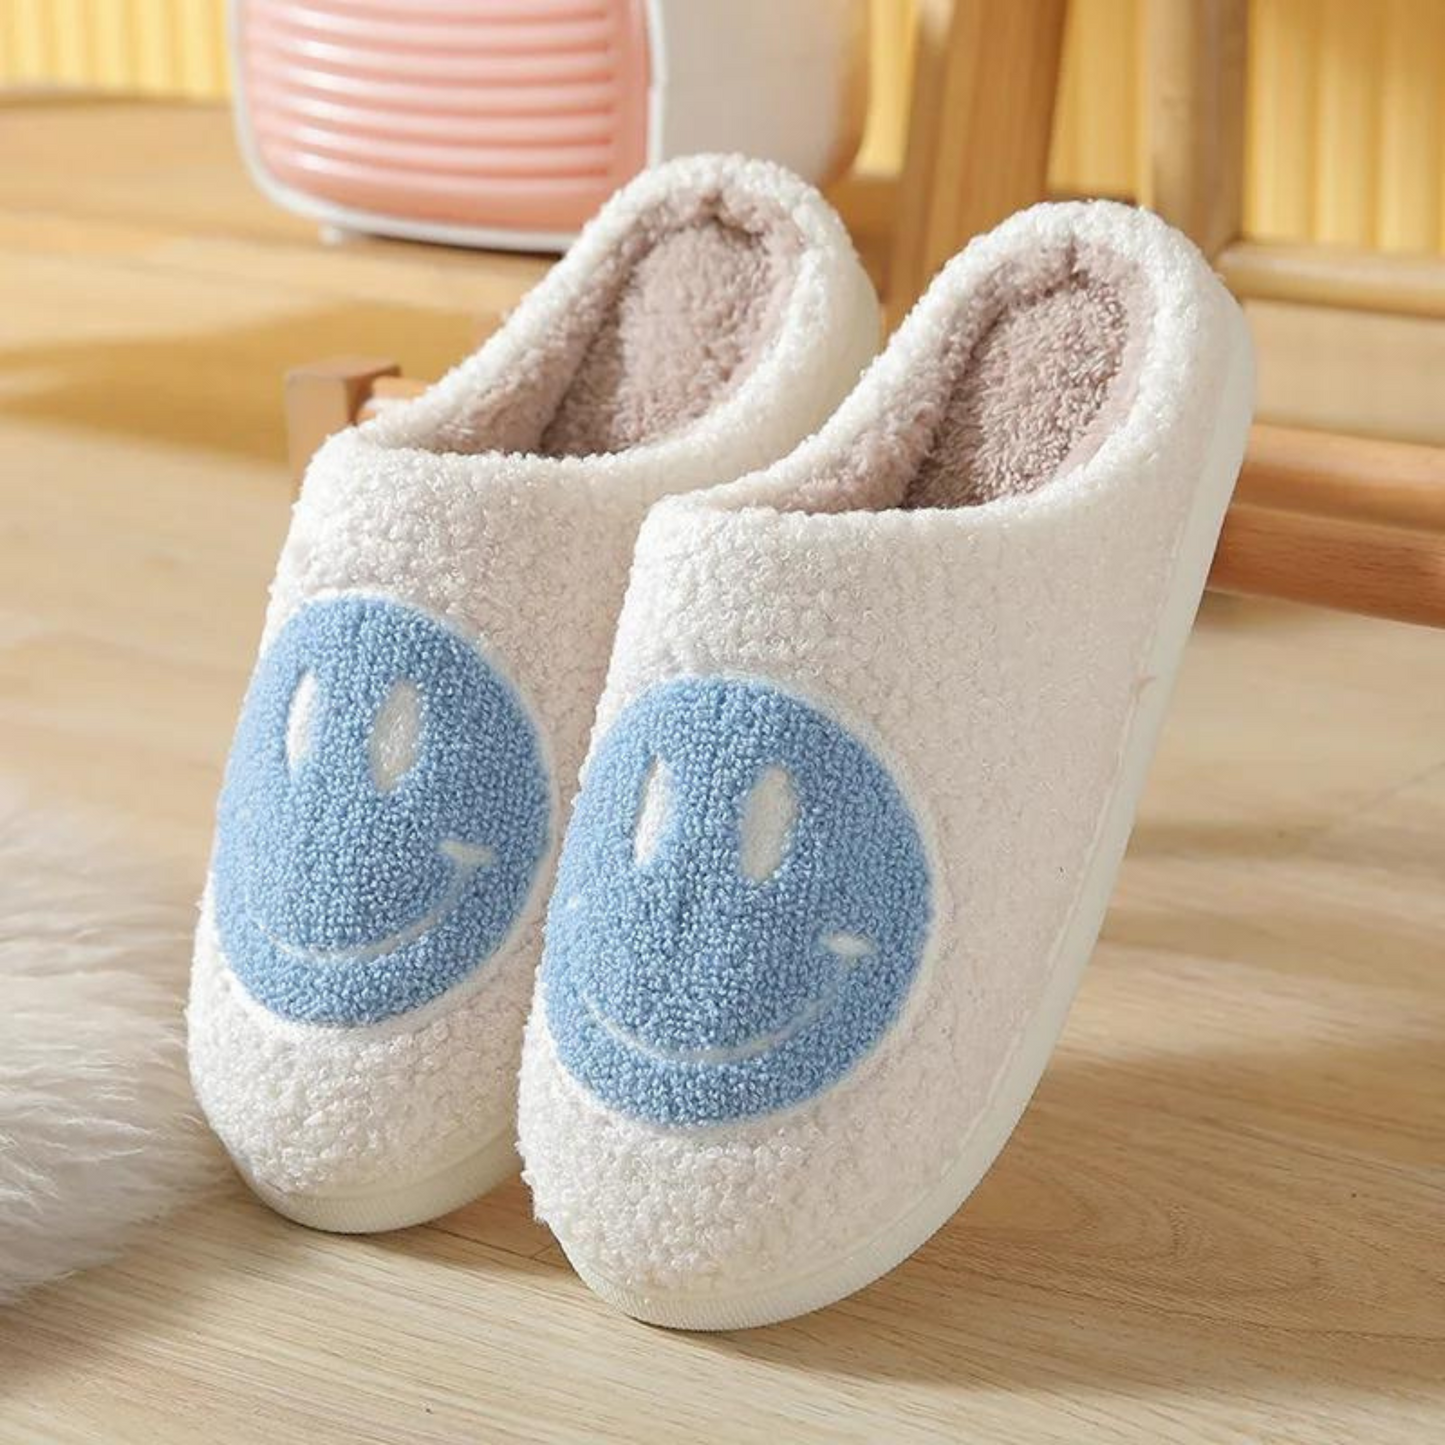 blue and white fuzzy smiley face slippers